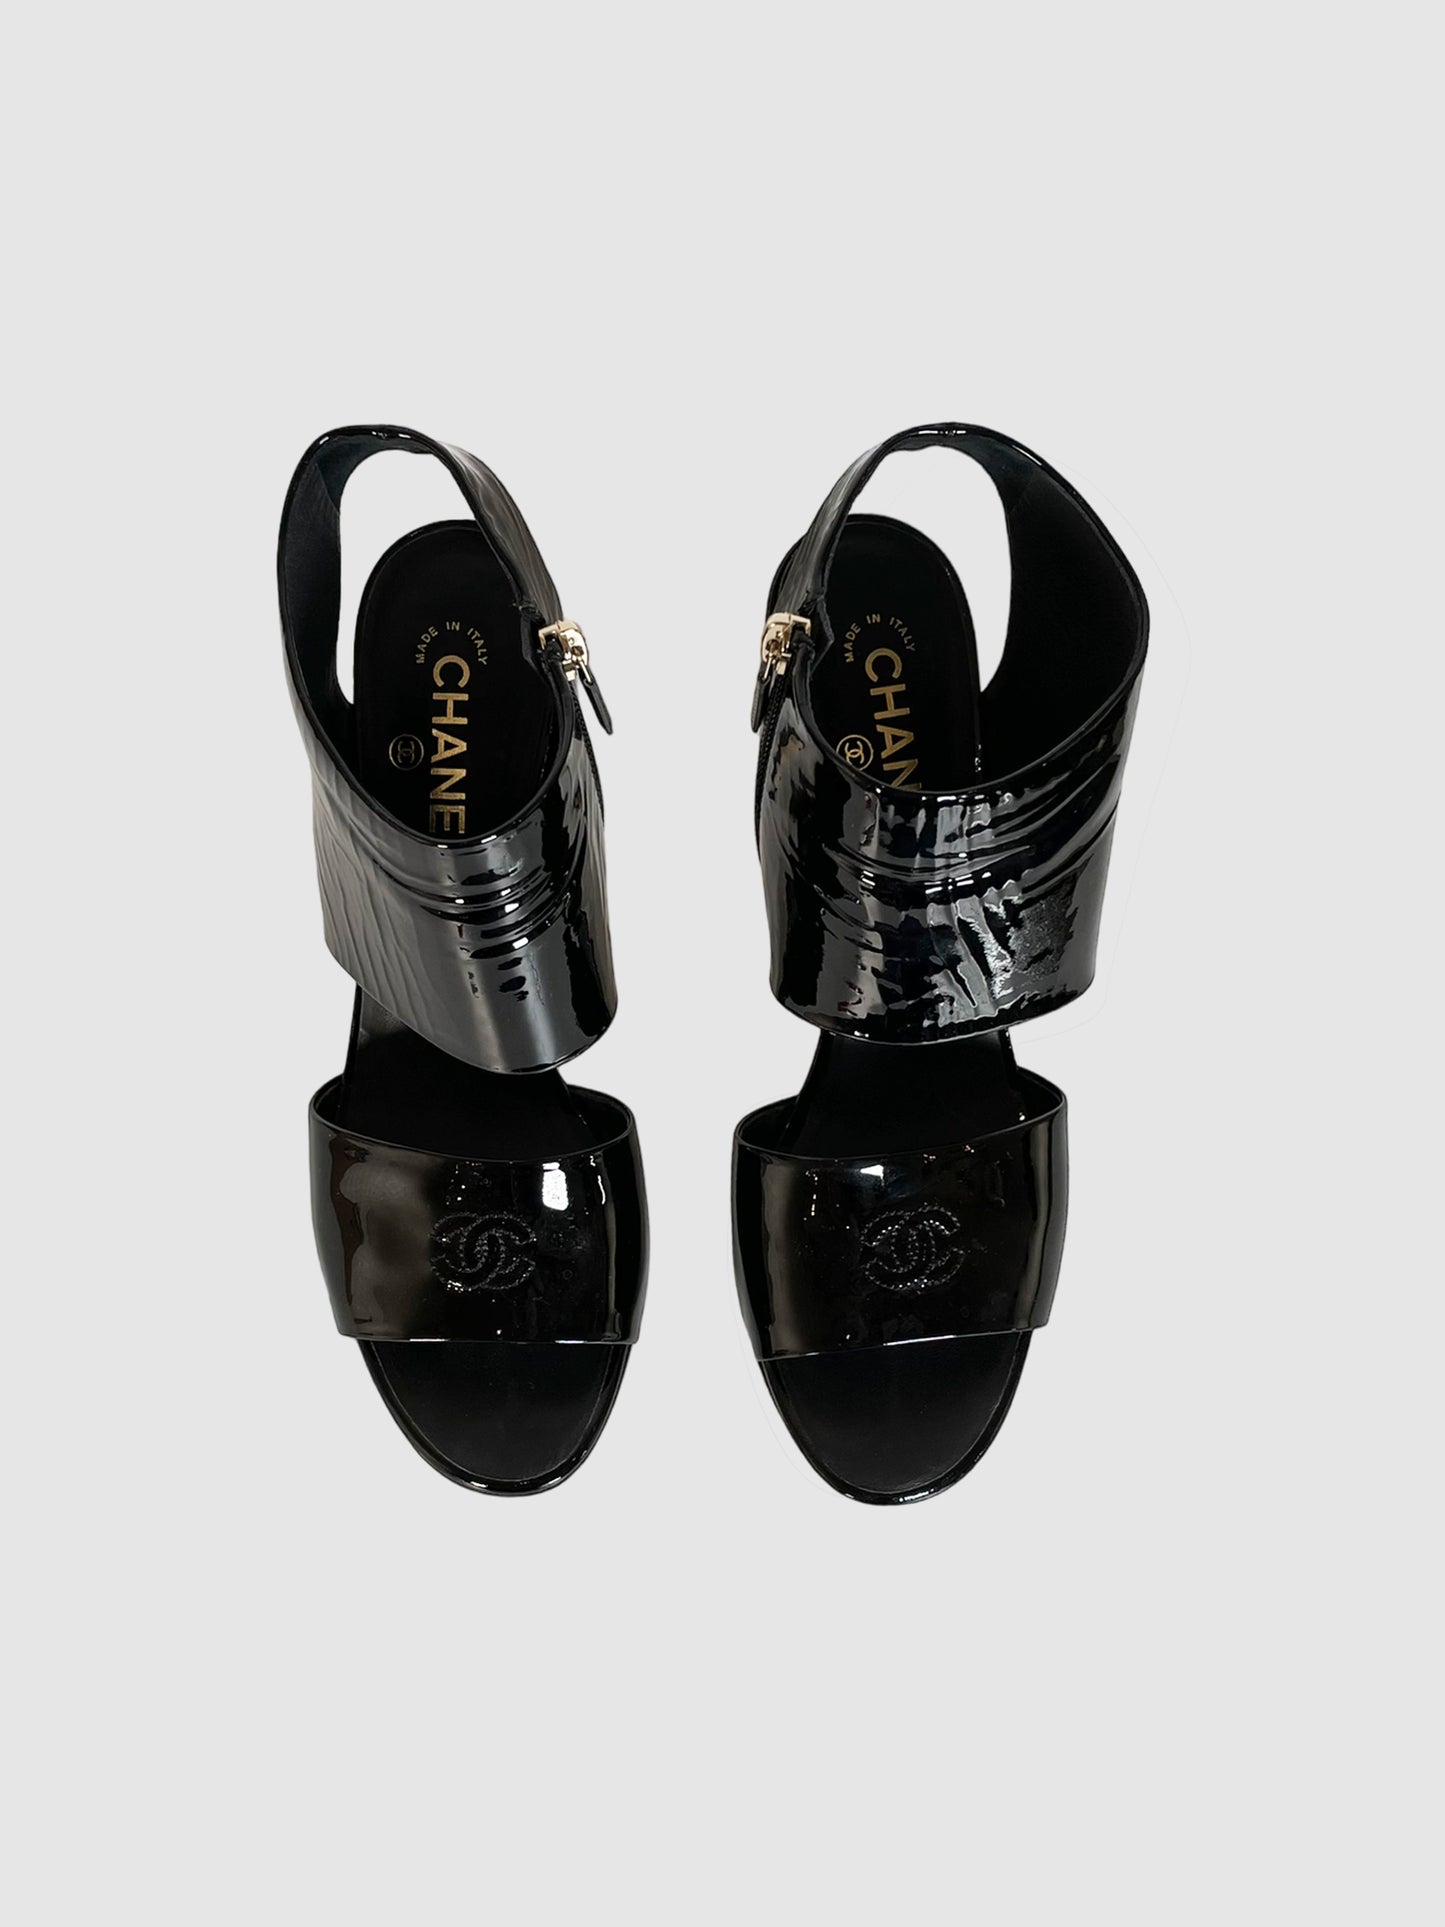 Patent Leather Sandals - Size 42